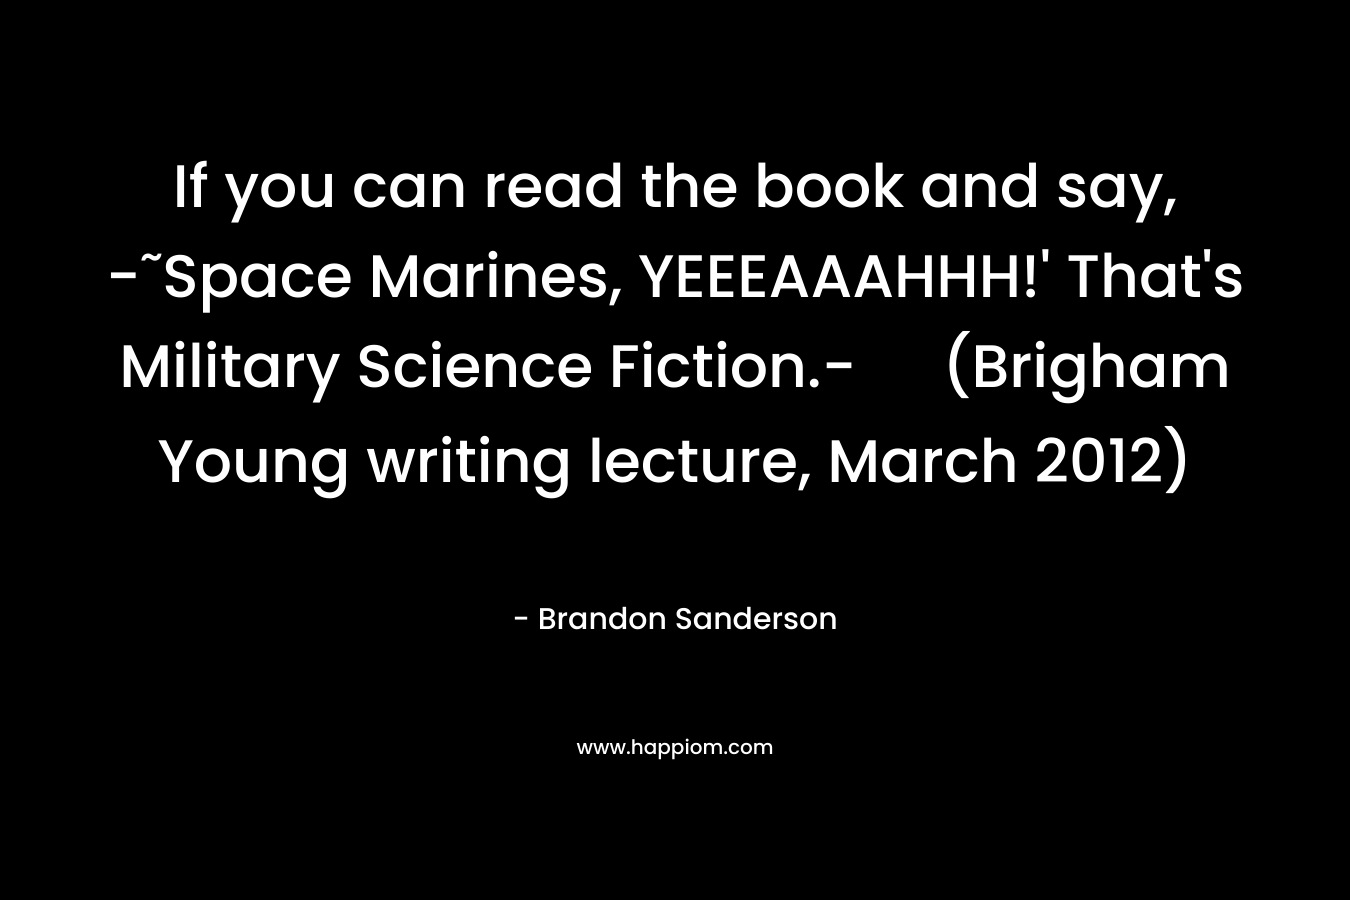 If you can read the book and say, -˜Space Marines, YEEEAAAHHH!’ That’s Military Science Fiction.- (Brigham Young writing lecture, March 2012) – Brandon Sanderson